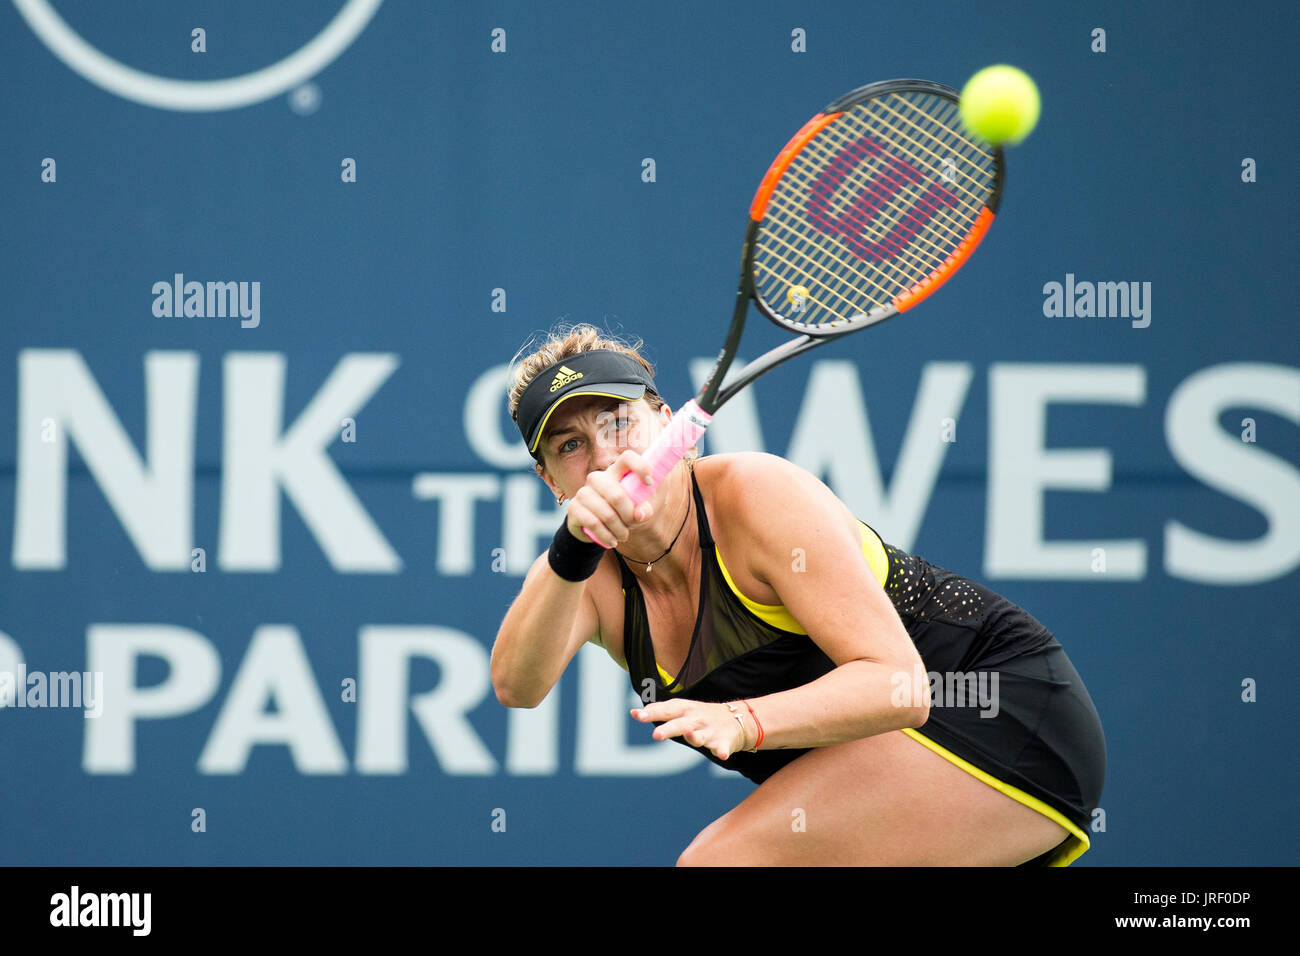 August 04, 2017: Anastasia Pavlyuchenkova (RUS) was defeated by CoCo Vandeweghe (USA) 6-2, 6-3 at the Bank of the West Classic being played at the Taube Tennis Stadium in Stanford, California. © Mal Taam/TennisClix/CSM Stock Photo